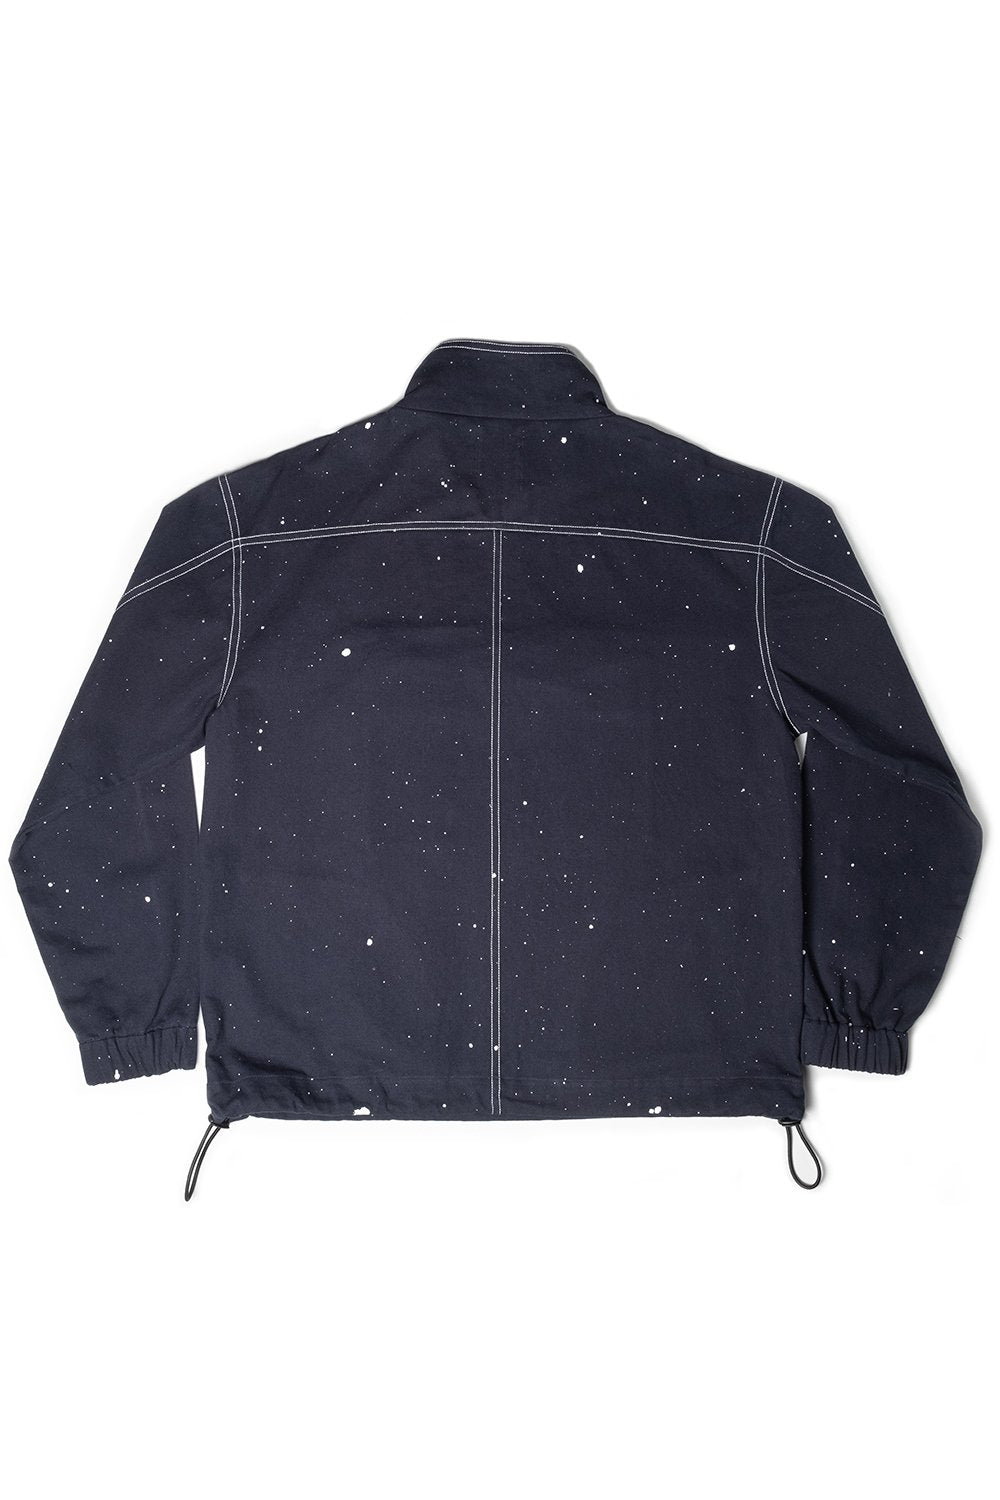 Blue Unisex Drill Jacket. Hand Made, Hand Painted Constellation Print. 100% Cotton. Featured in Vogue Magazine.Designed in Madras, Made in India  | BISKIT UNISEX CLOTHING LABEL